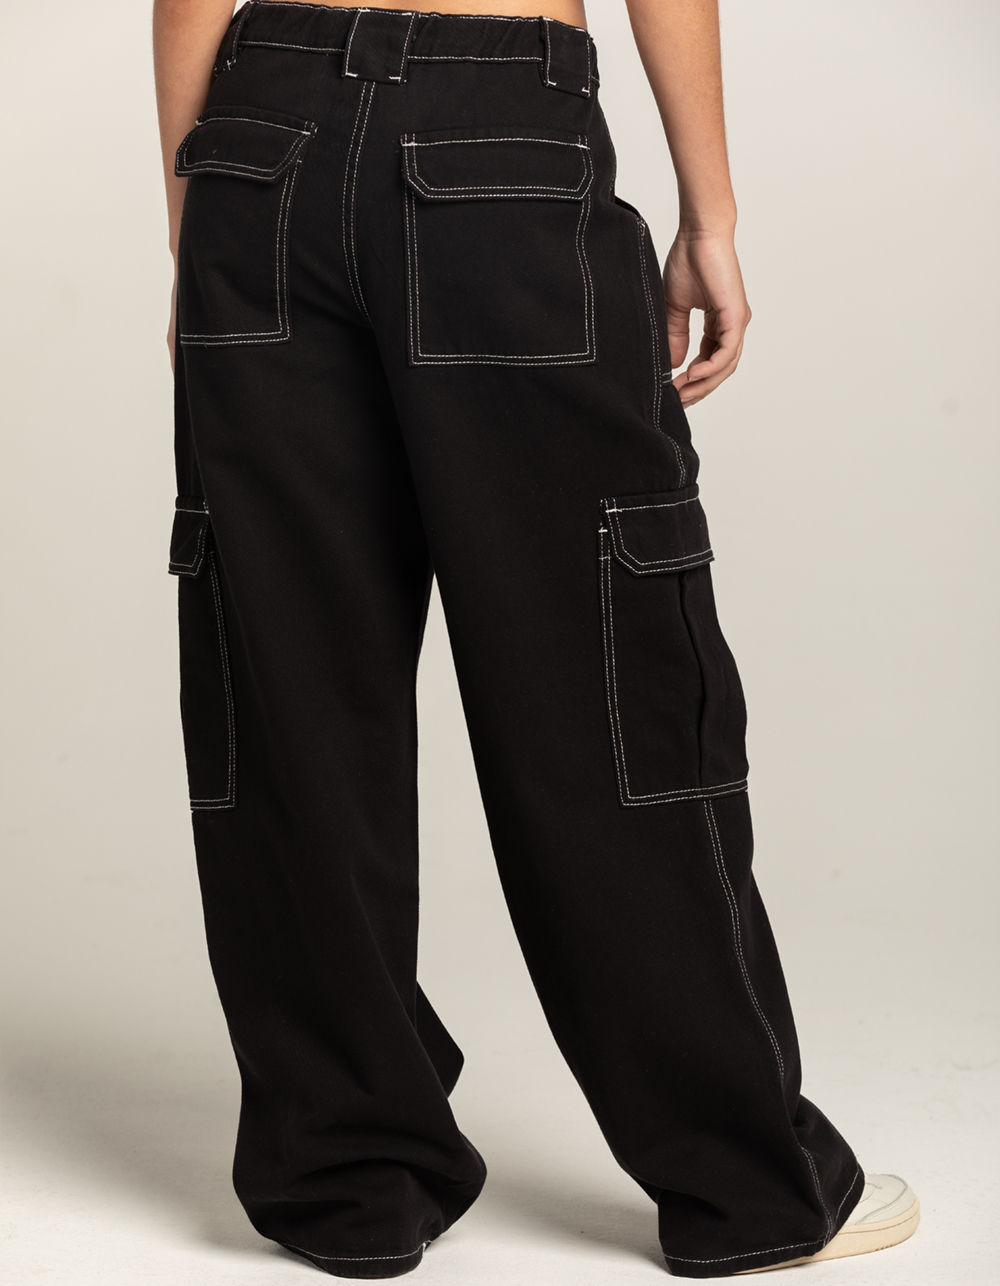 Genuine Dickies Women's Relaxed Fit Straight-Leg Cargo Pant - Walmart.com